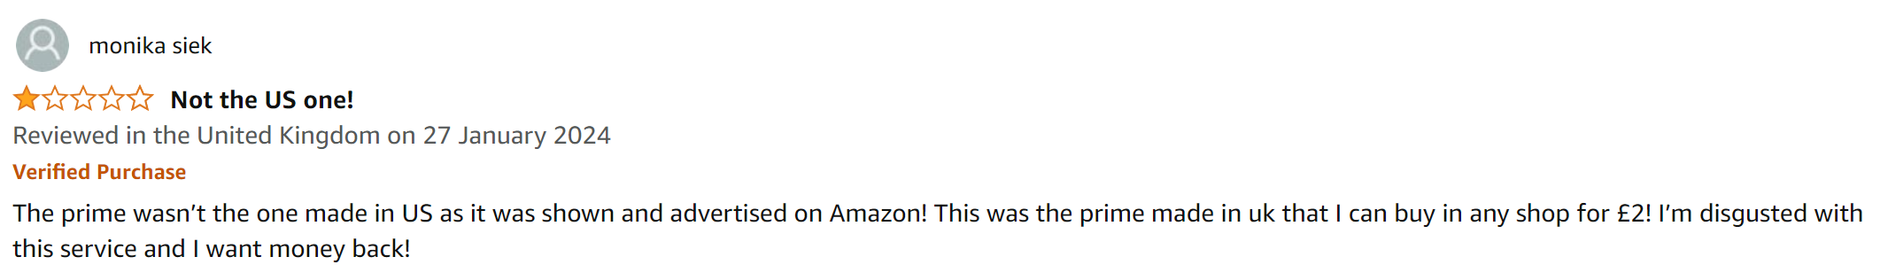 Amazon Negative product review